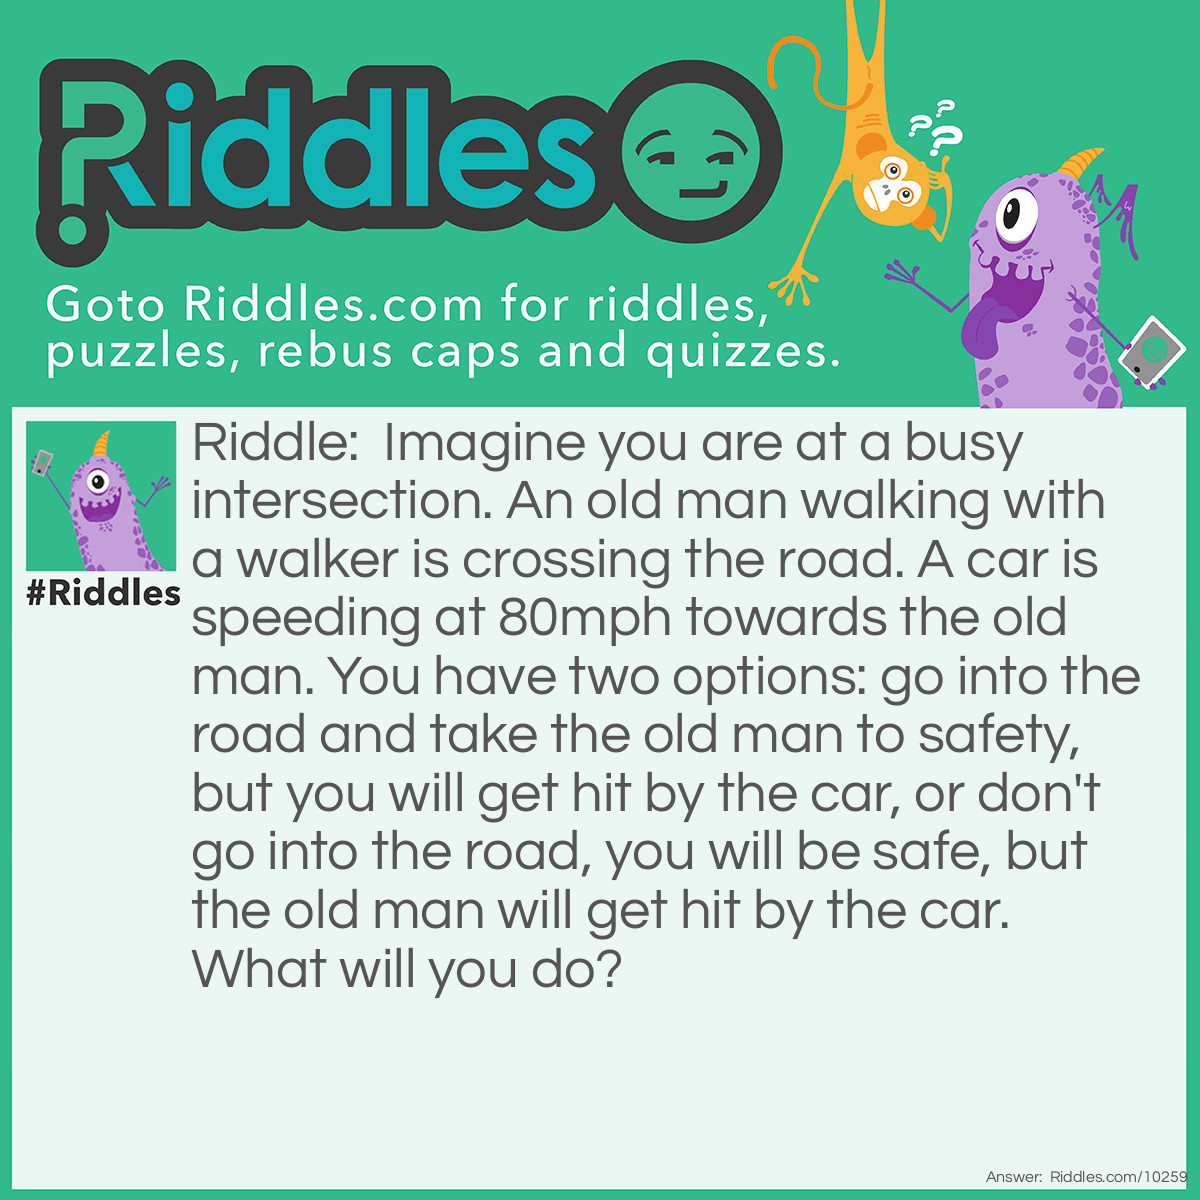 Riddle: Imagine you are at a busy intersection. An old man walking with a walker is crossing the road. A car is speeding at 80mph towards the old man. You have two options: go into the road and take the old man to safety, but you will get hit by the car, or don't go into the road, you will be safe, but the old man will get hit by the car. What will you do? Answer: Stop imagining and everything will be ok.